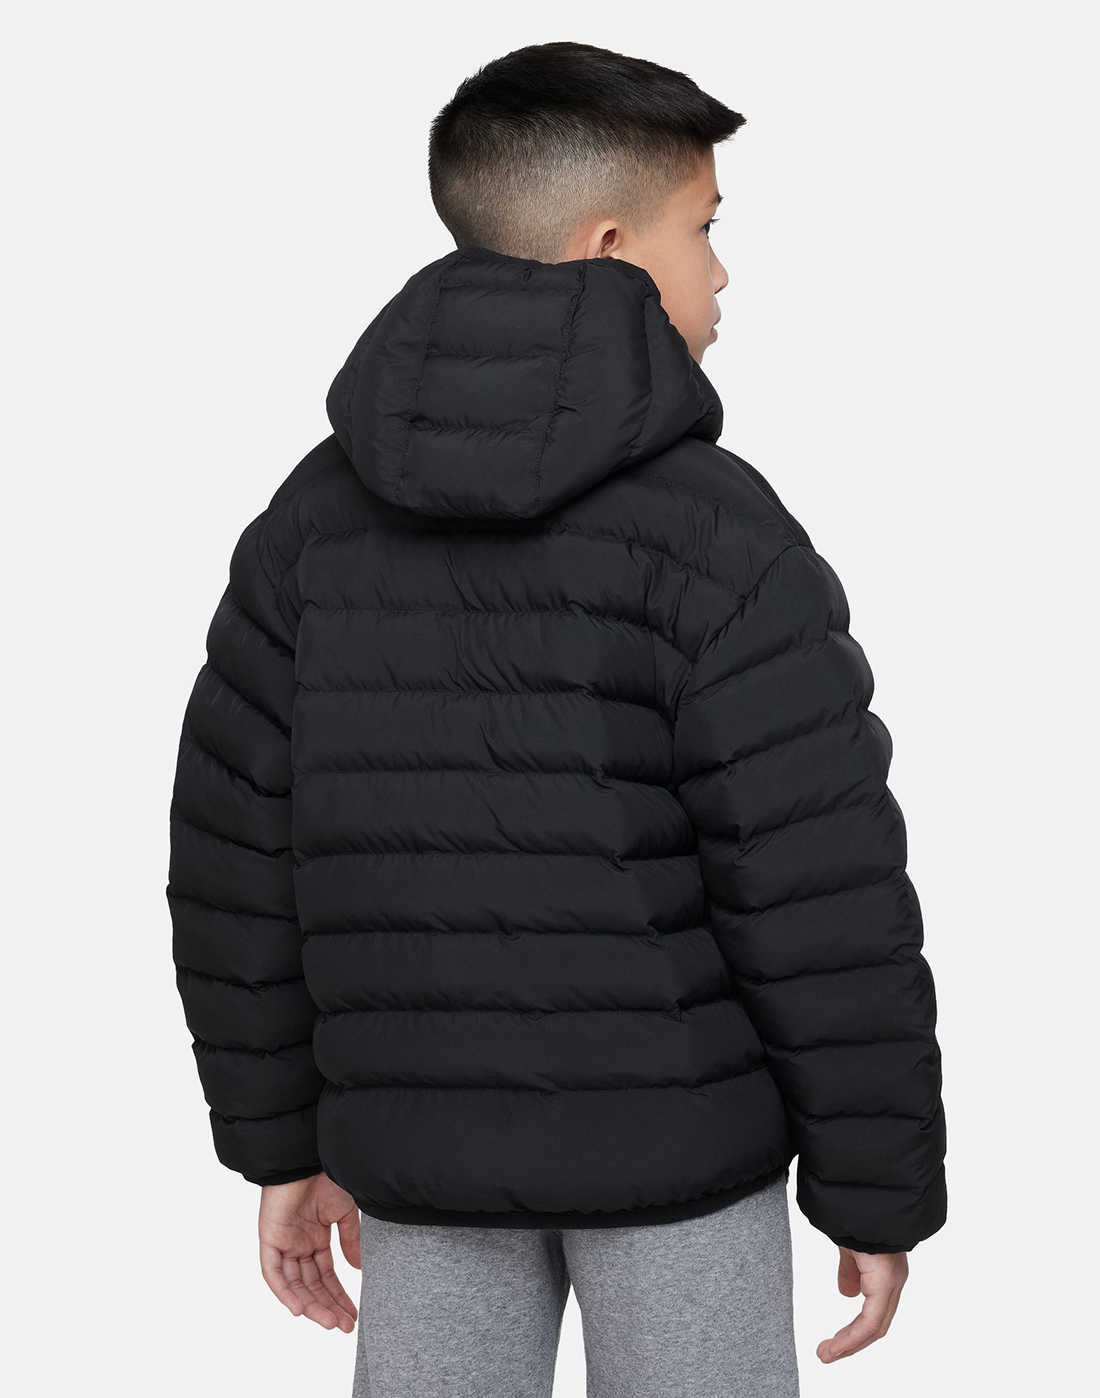 Nike Older Boys Synthetic Fill Jacket - Black | Life Style Sports IE